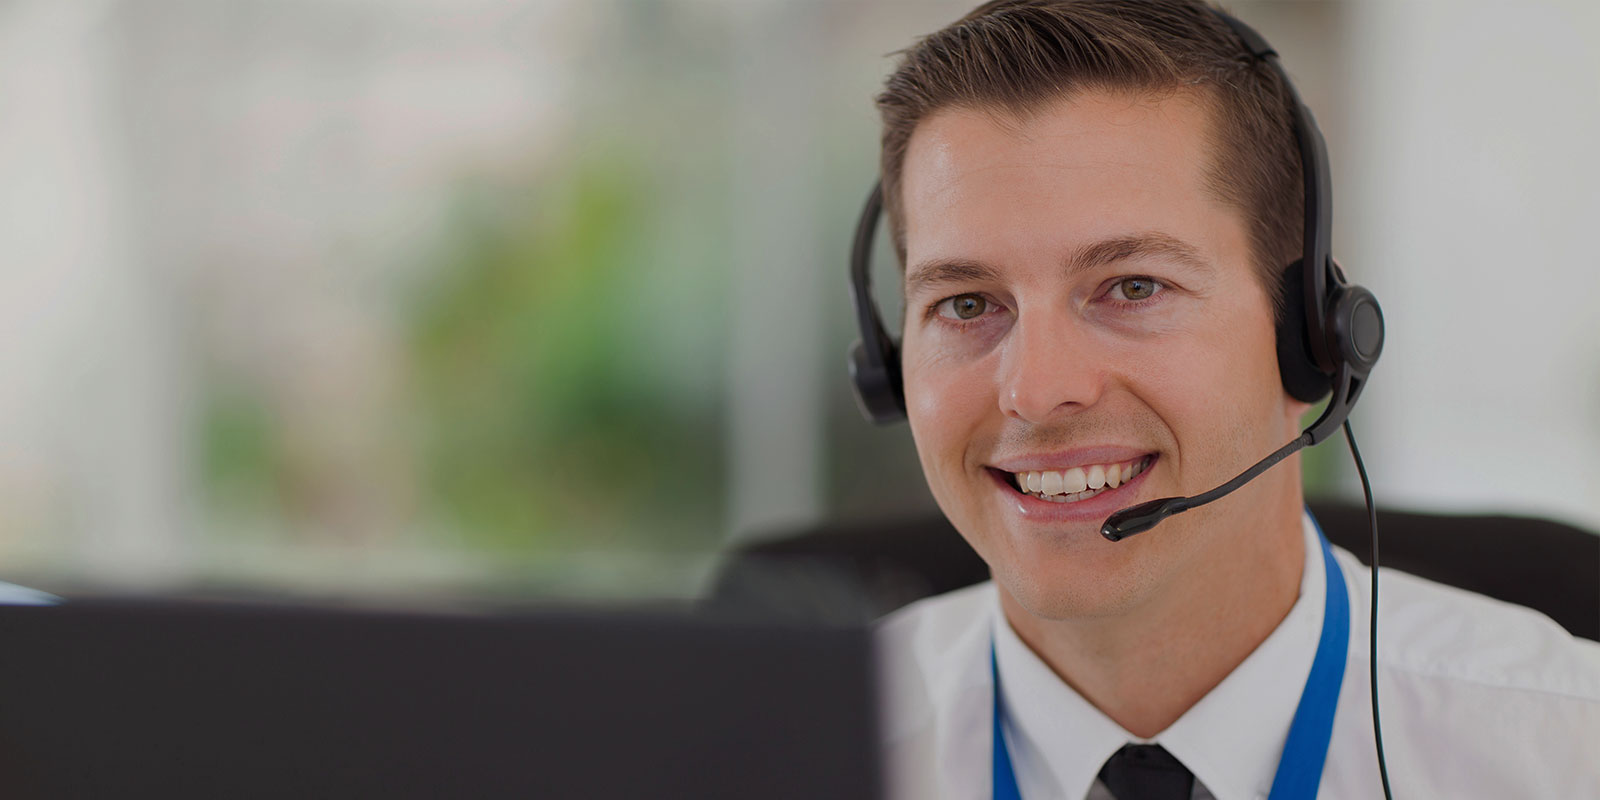 Benefits of Using CRM for the Call Center Industry